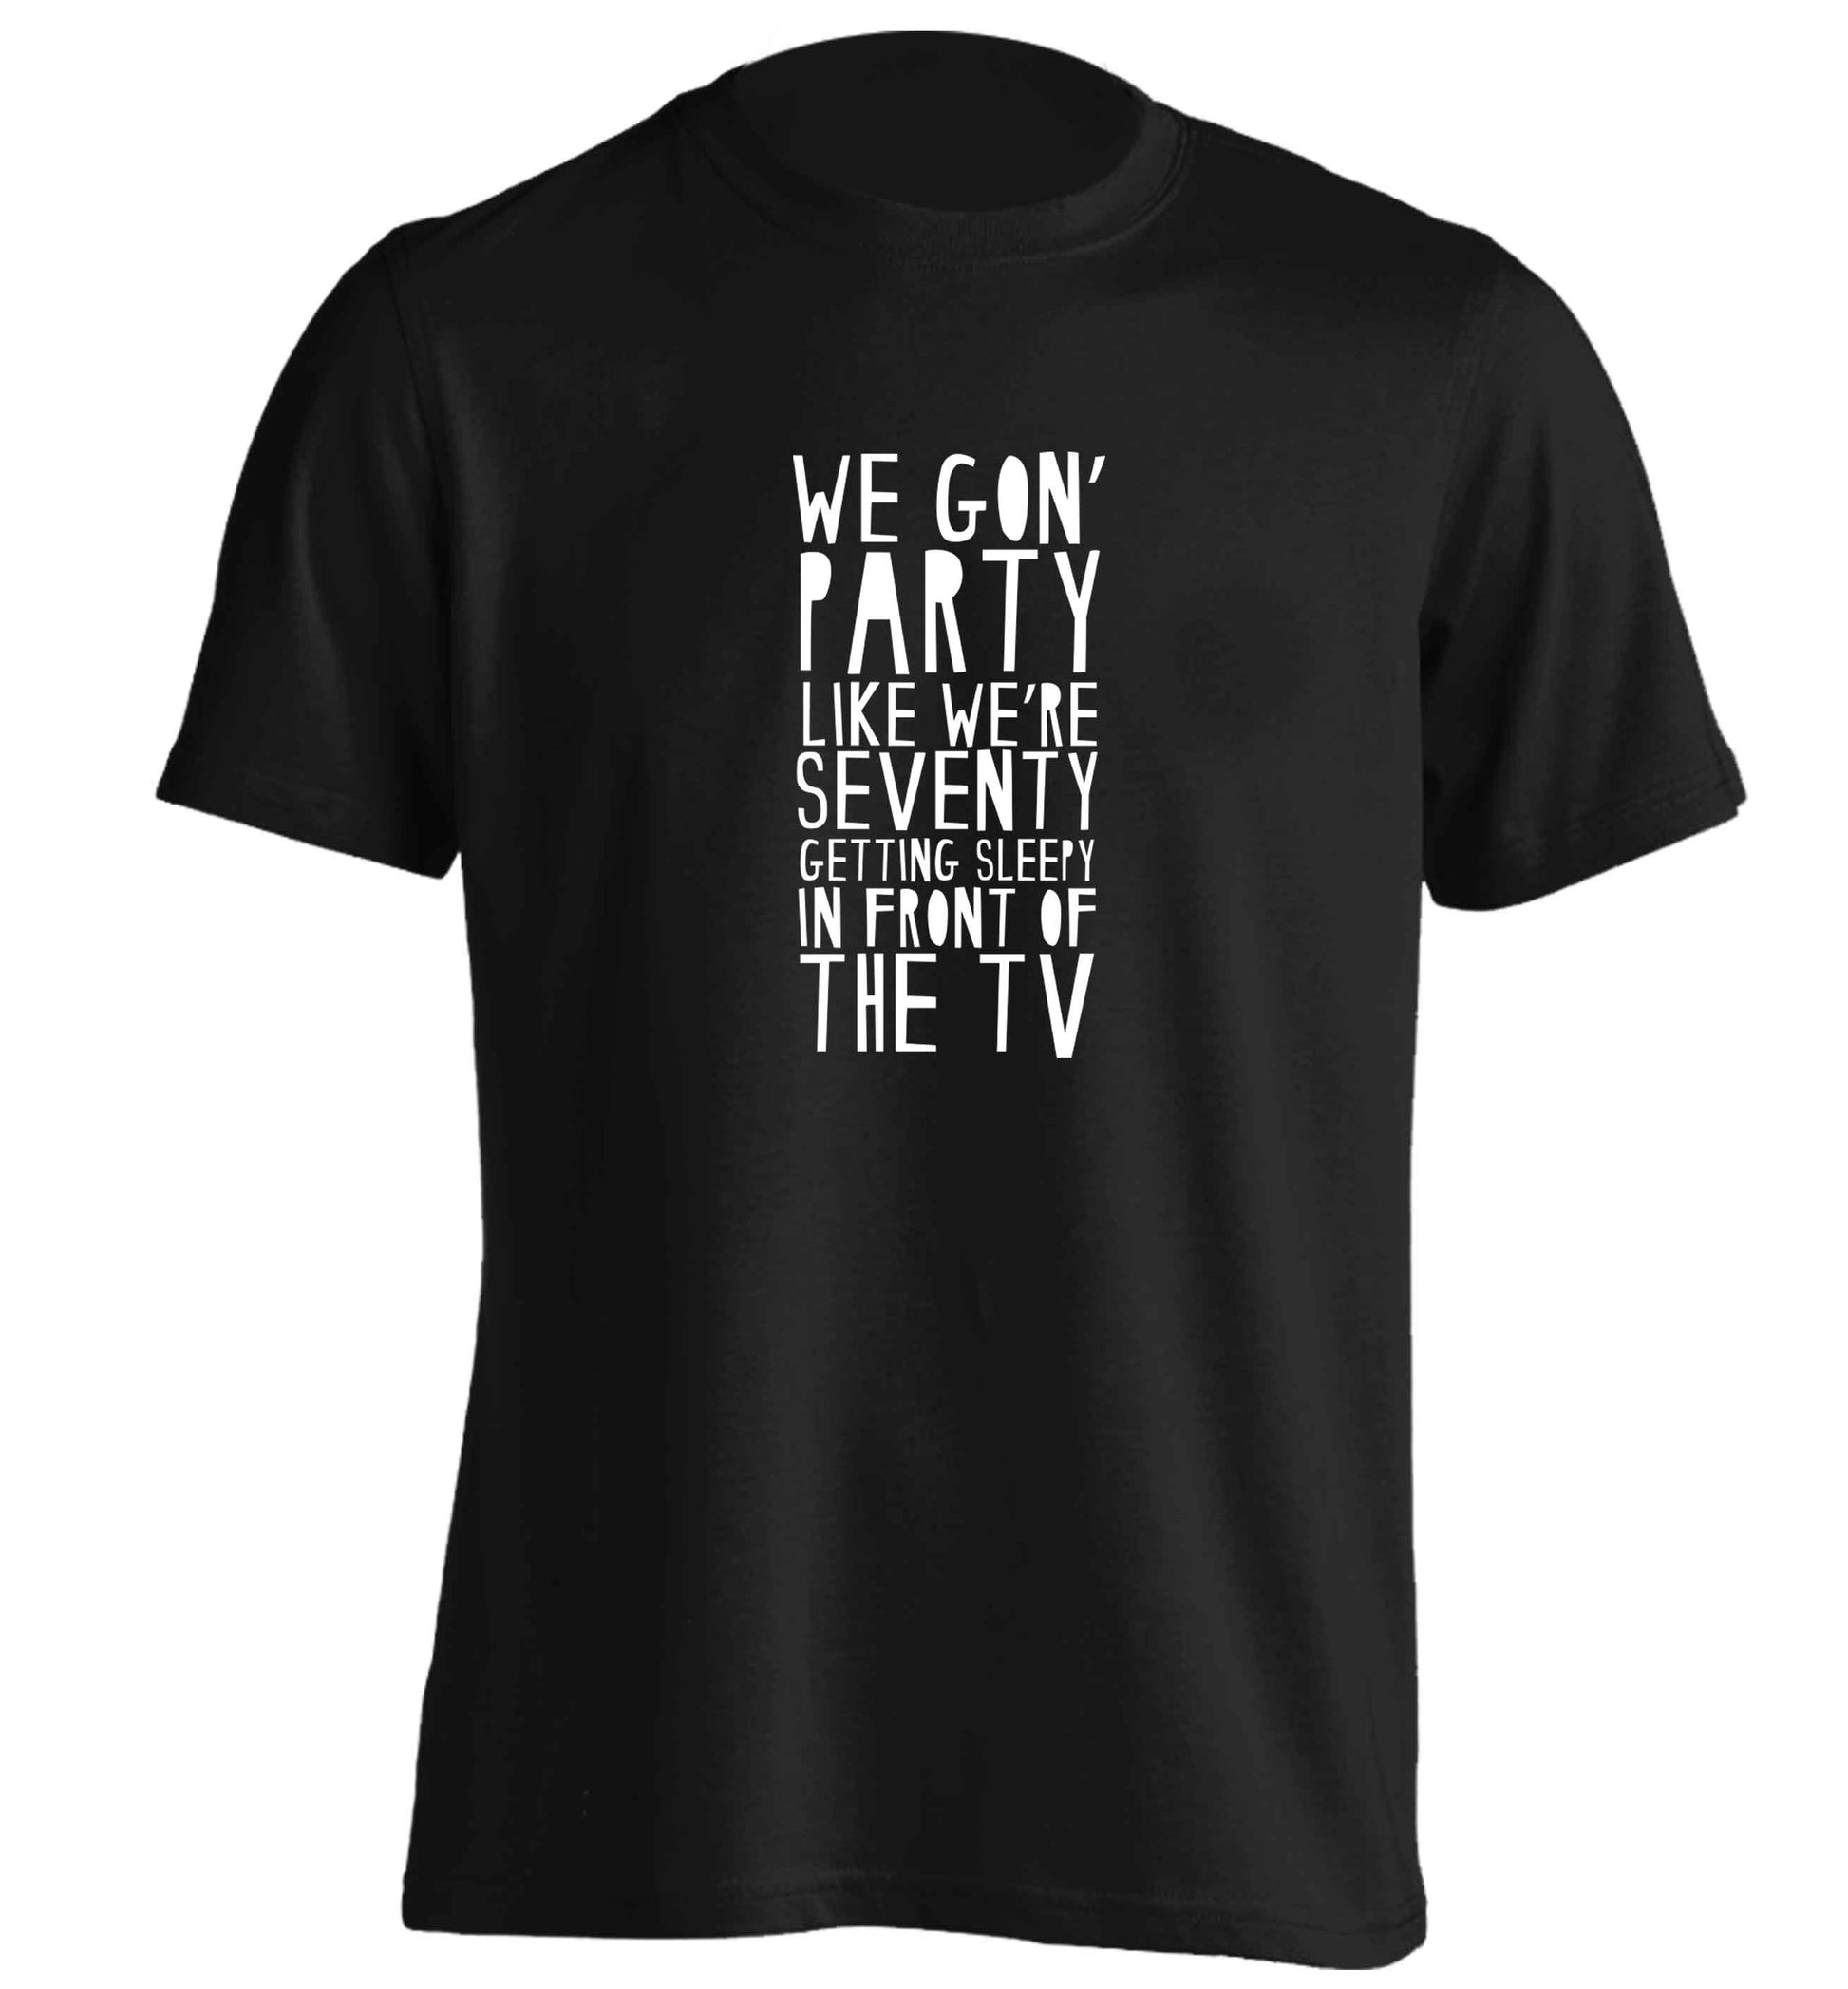 We gon' party like we're seventy getting sleepy in front of the TV adults unisex black Tshirt 2XL